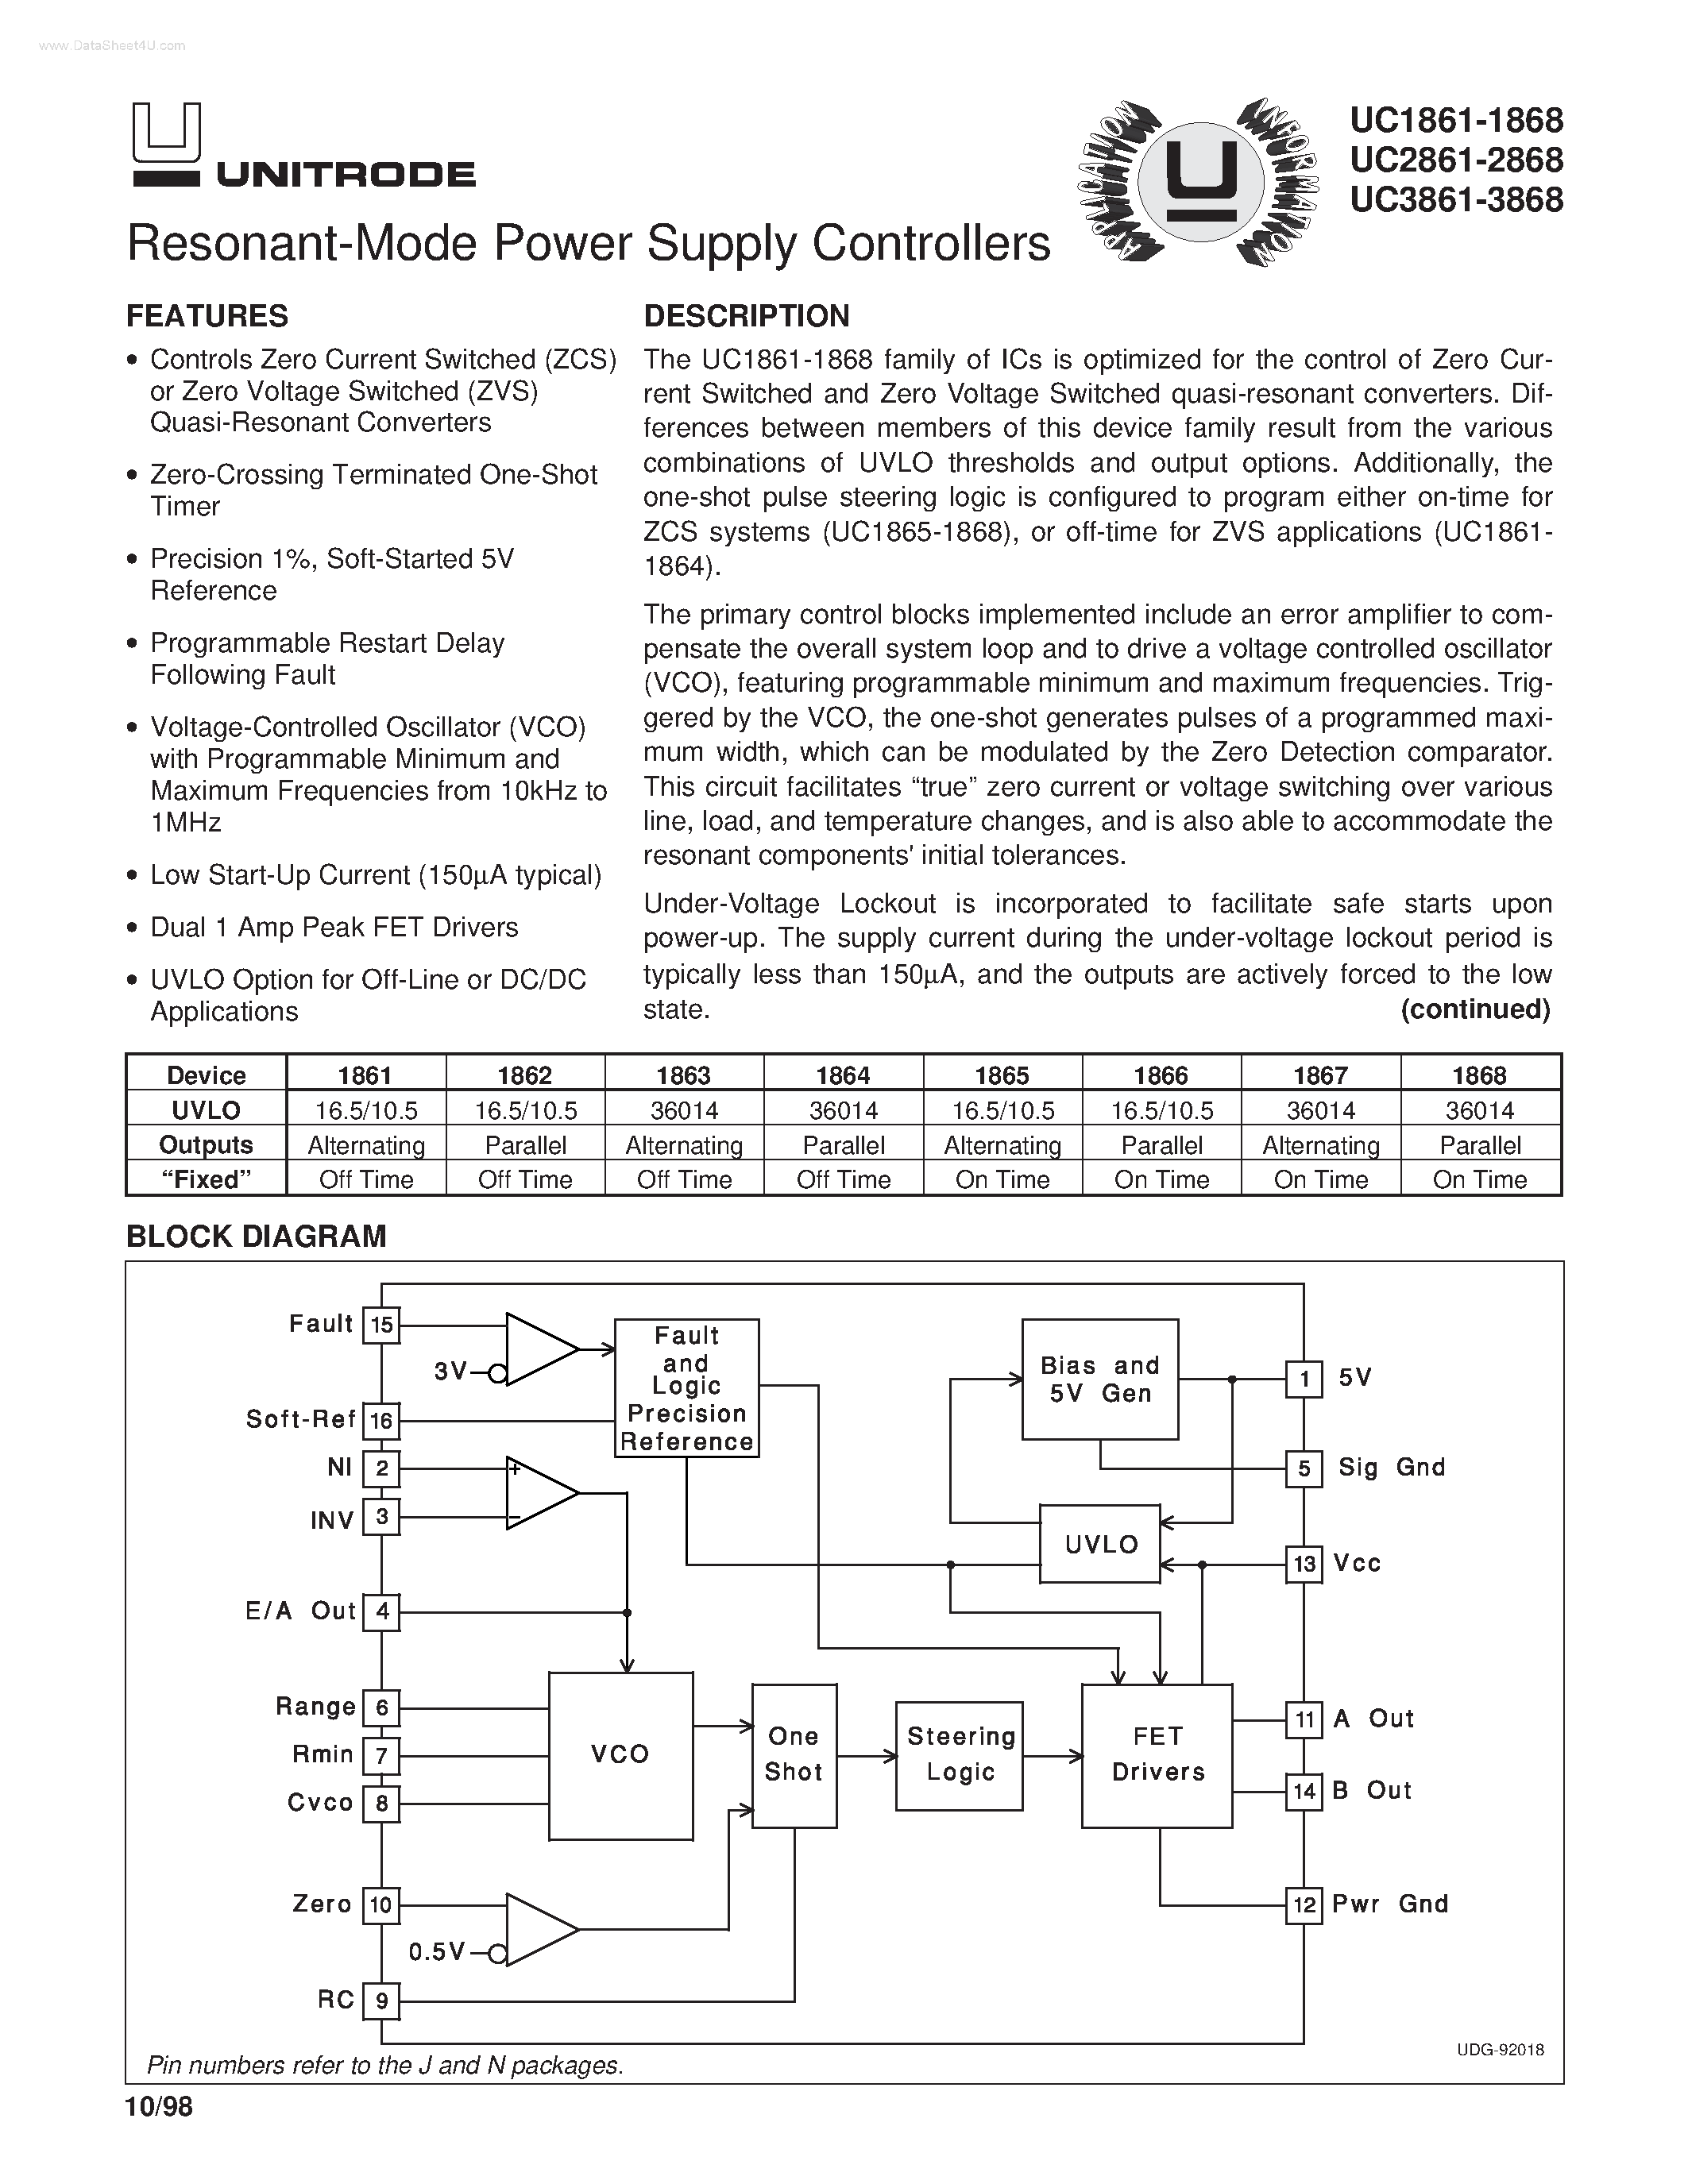 Datasheet UC1861 - (UC1861 - 1868) Resonant-Mode Power Supply Controllers page 1